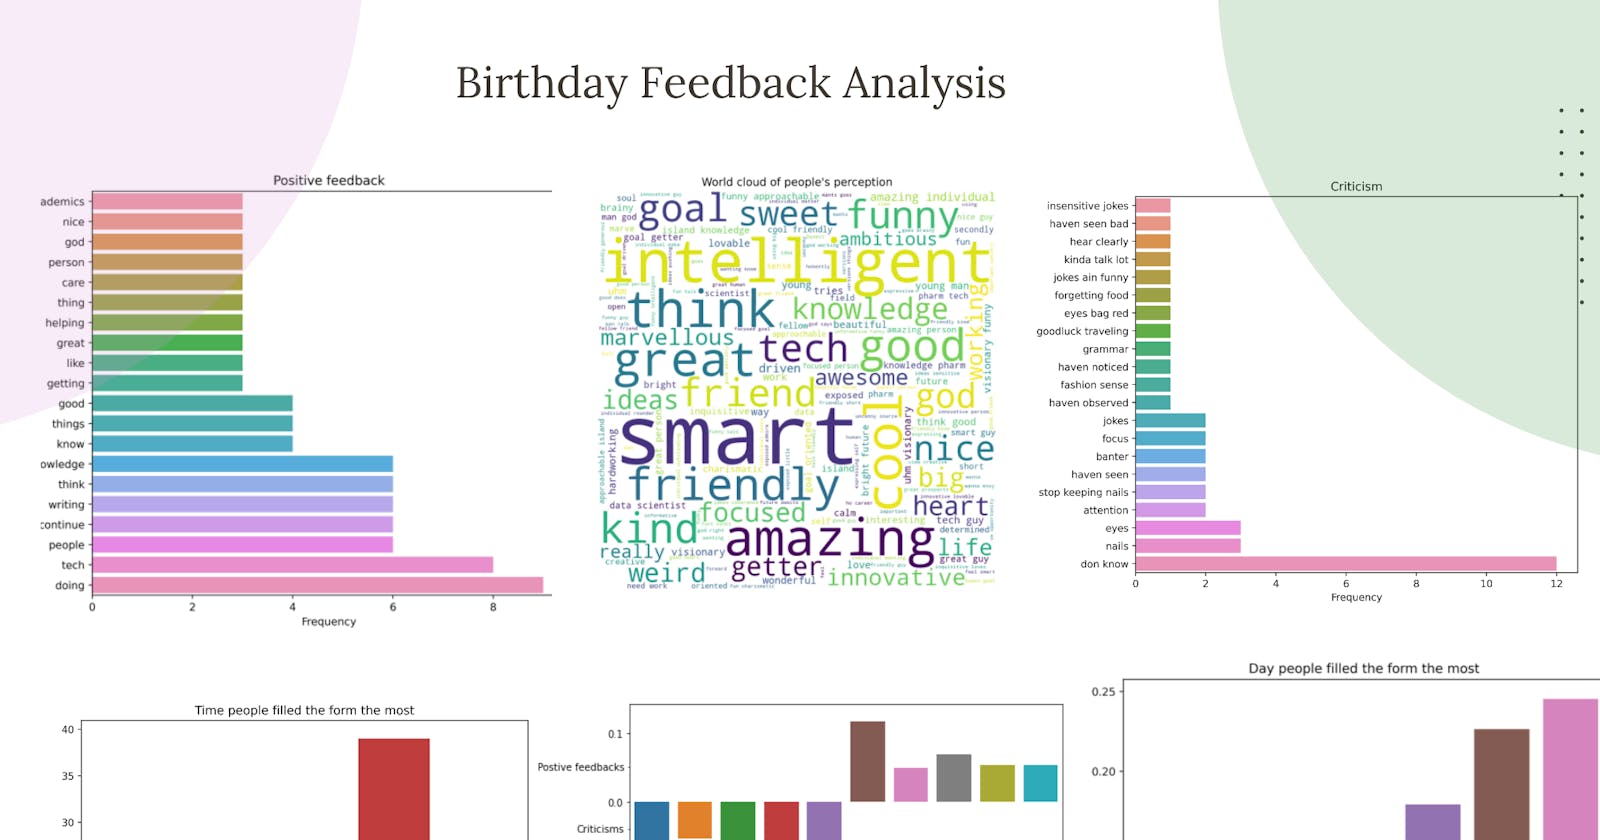 Analysis of personal feedback I got from my friends before my birthday